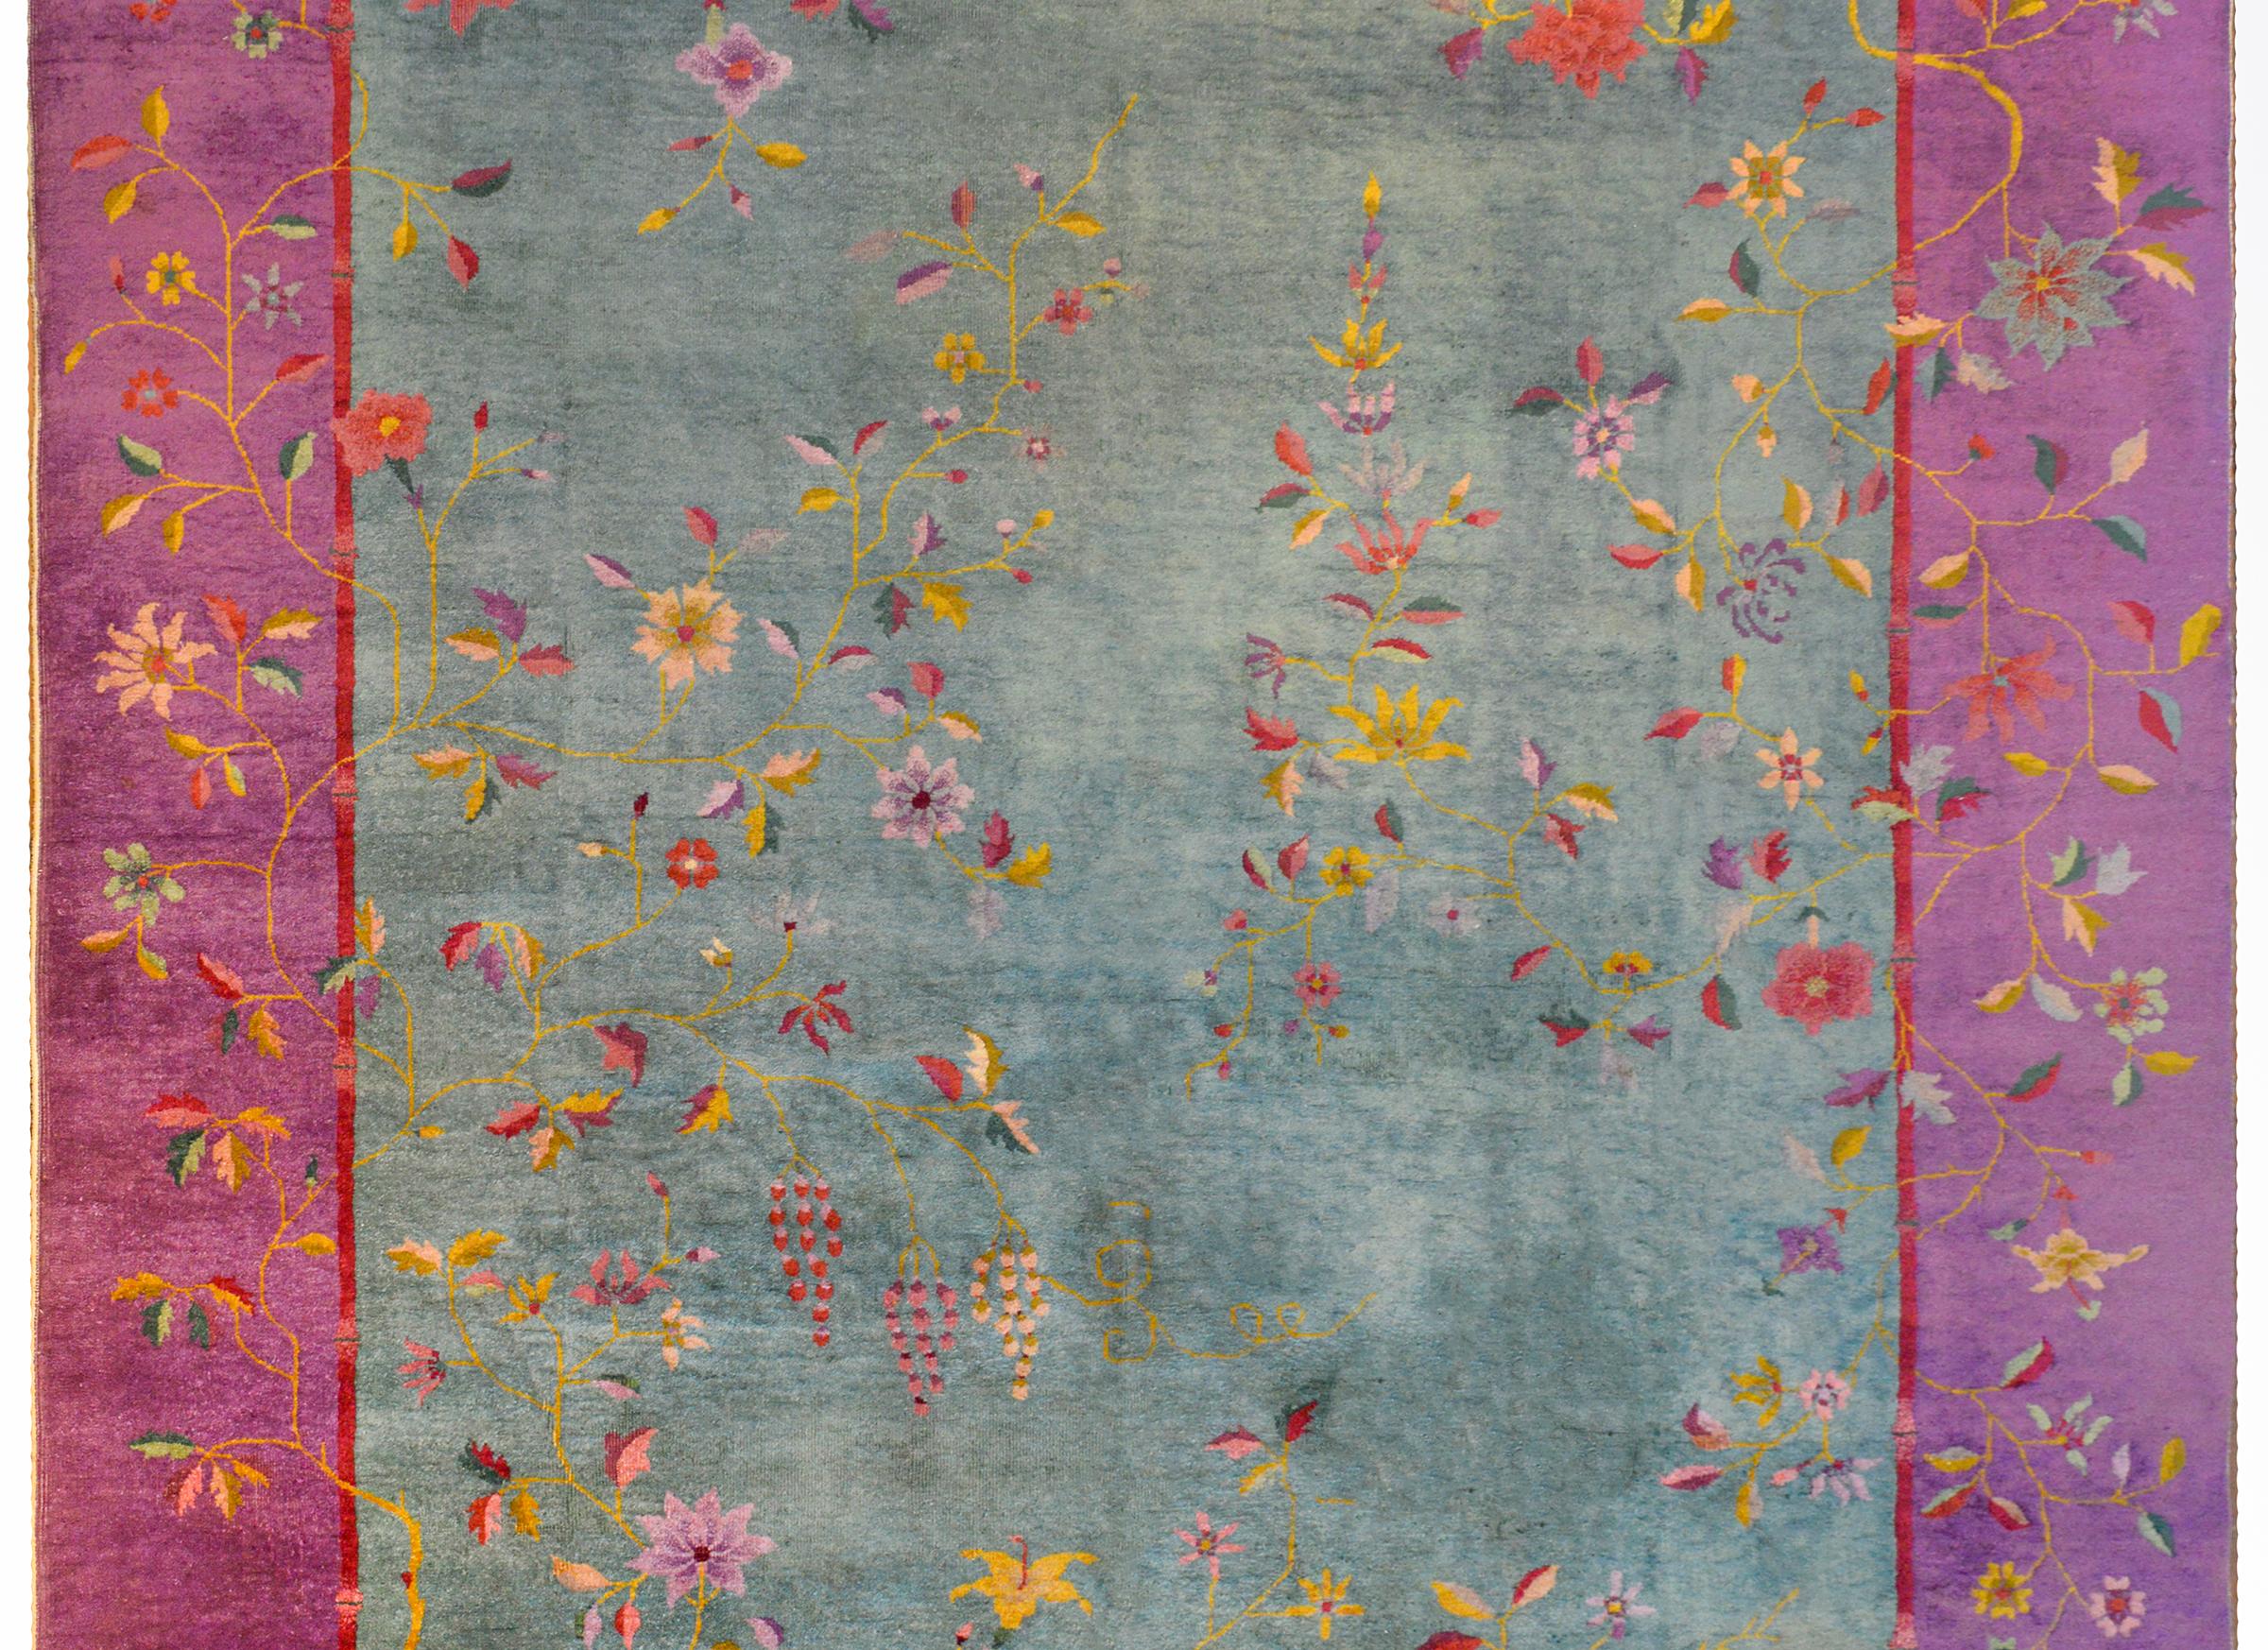 A brilliant early 20th century Chinese Art Deco rug with a pale mint green field surrounded by a wide fuchsia border with a thin crimson inner stripe. Myriad flowering branches and vines including chrysanthemums, peonies, and sherry blossoms overlay